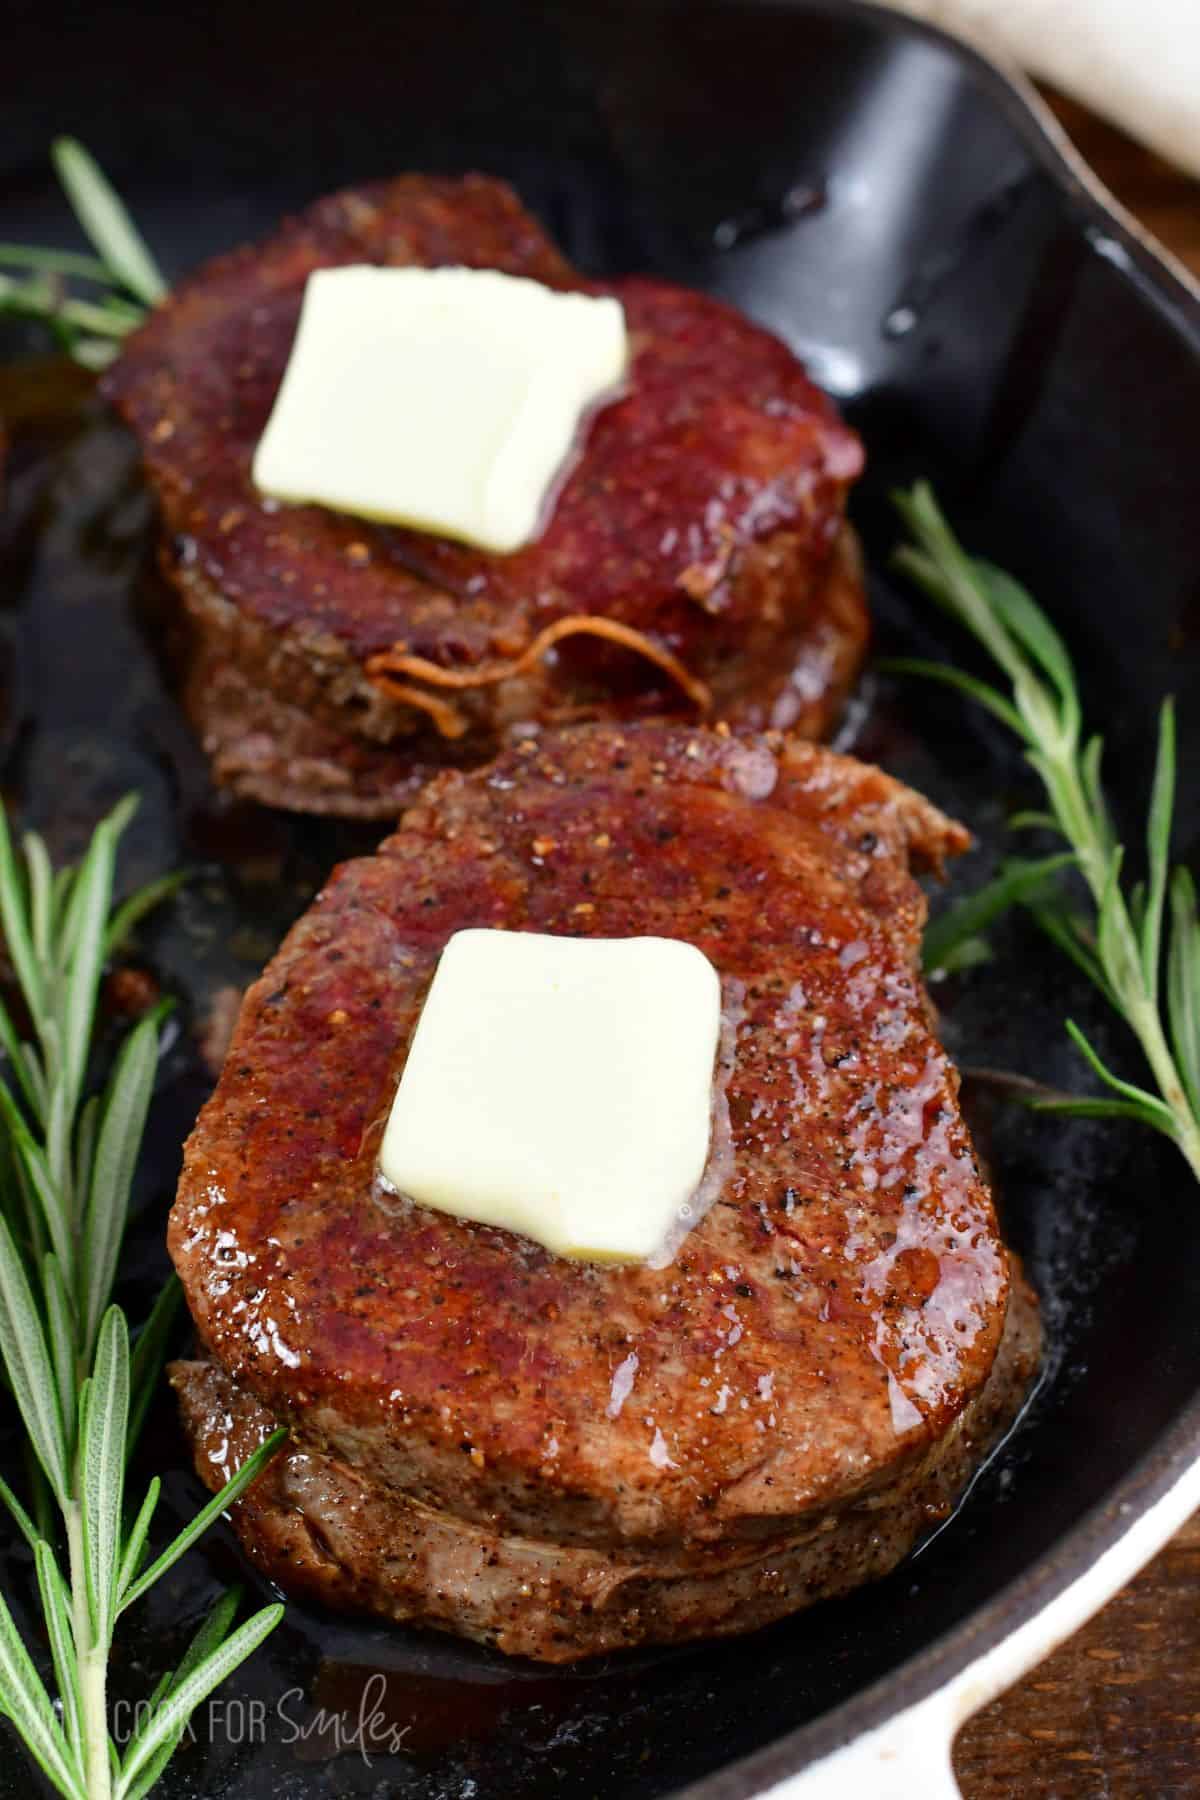 two gilet mignon steaks topped with butter and rosemary sprigs next to it.